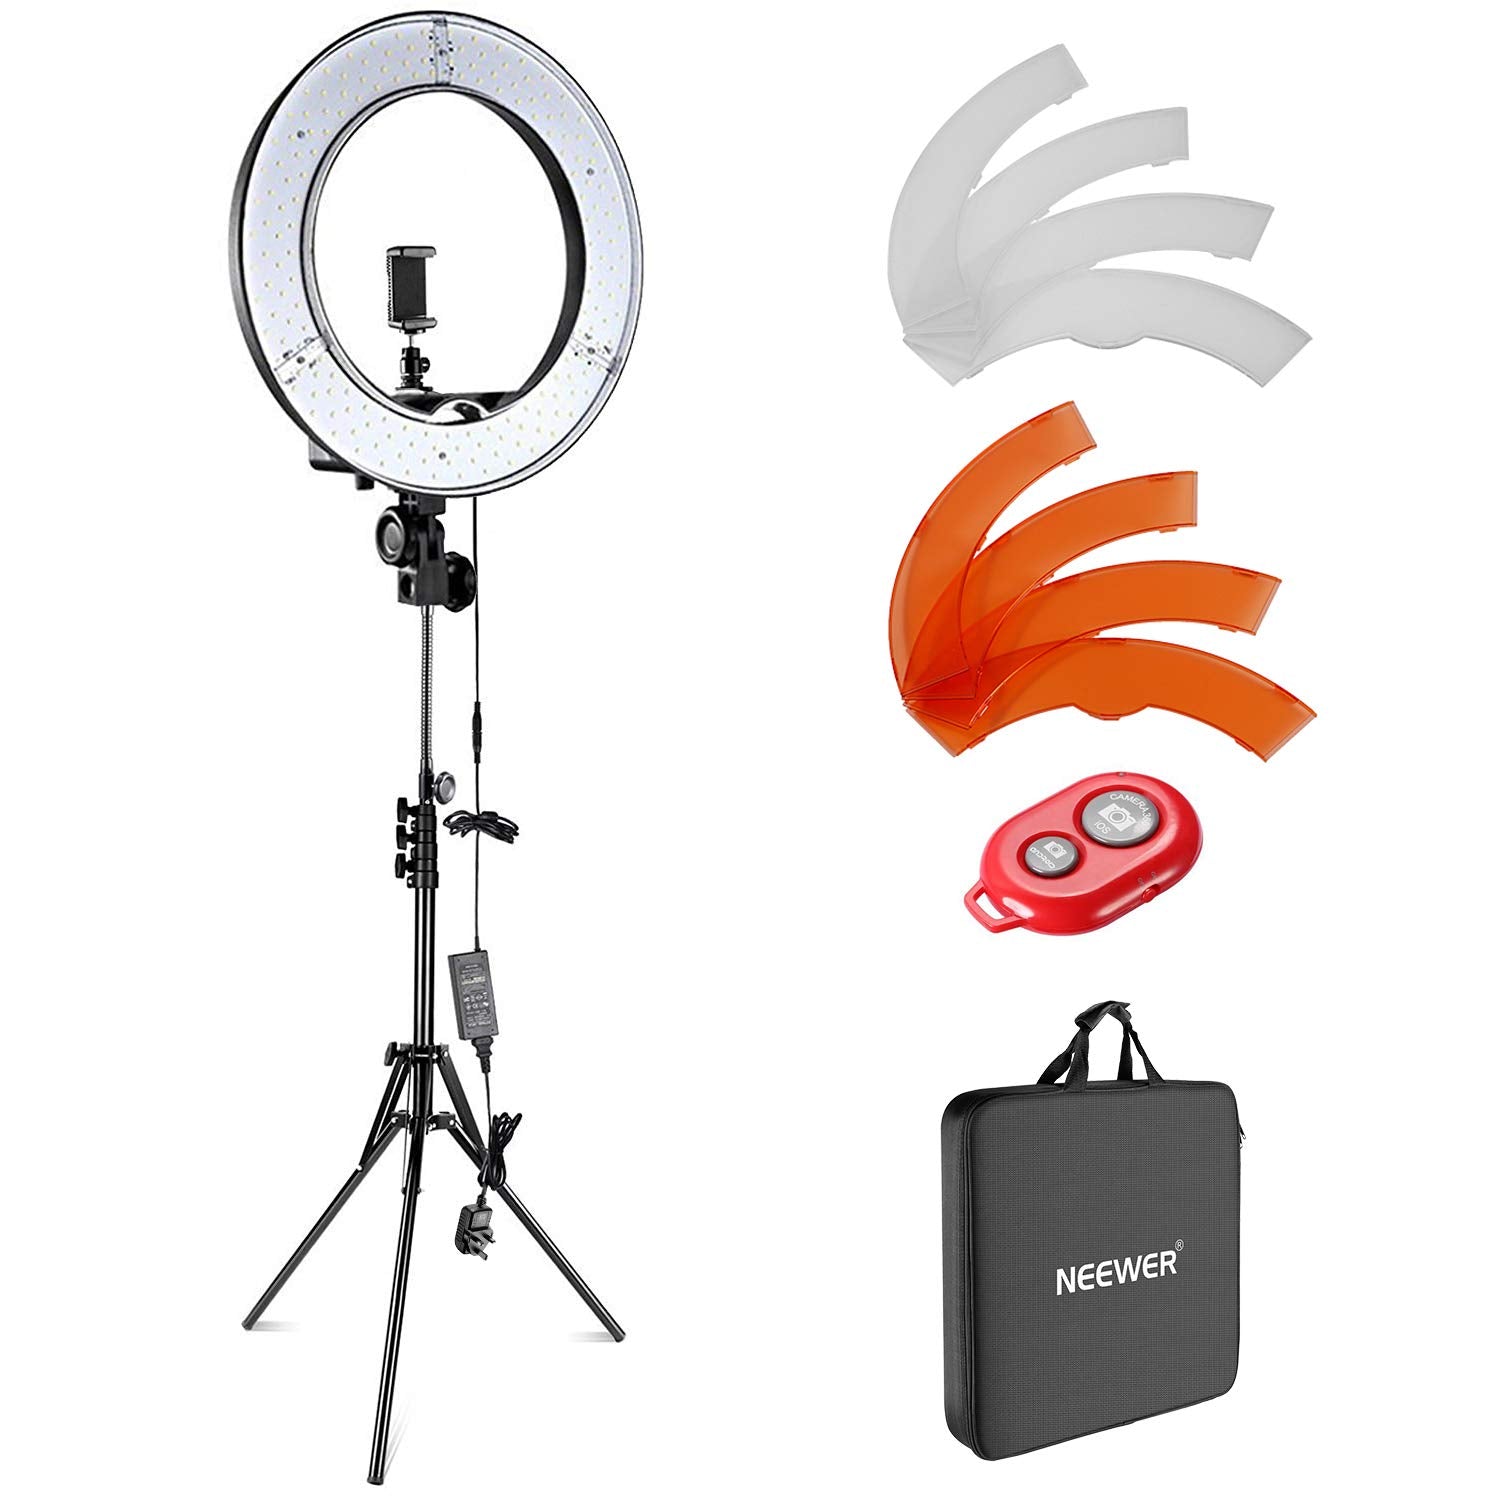 Neewer Camera Photo Video Lighting Kit: 48 centimeters Outer 55W 5500K Dimmable LED Ring Light Light Stand Bluetooth Receiver for Smartphone Youtube TikTok Self-Portrait Video Shooting